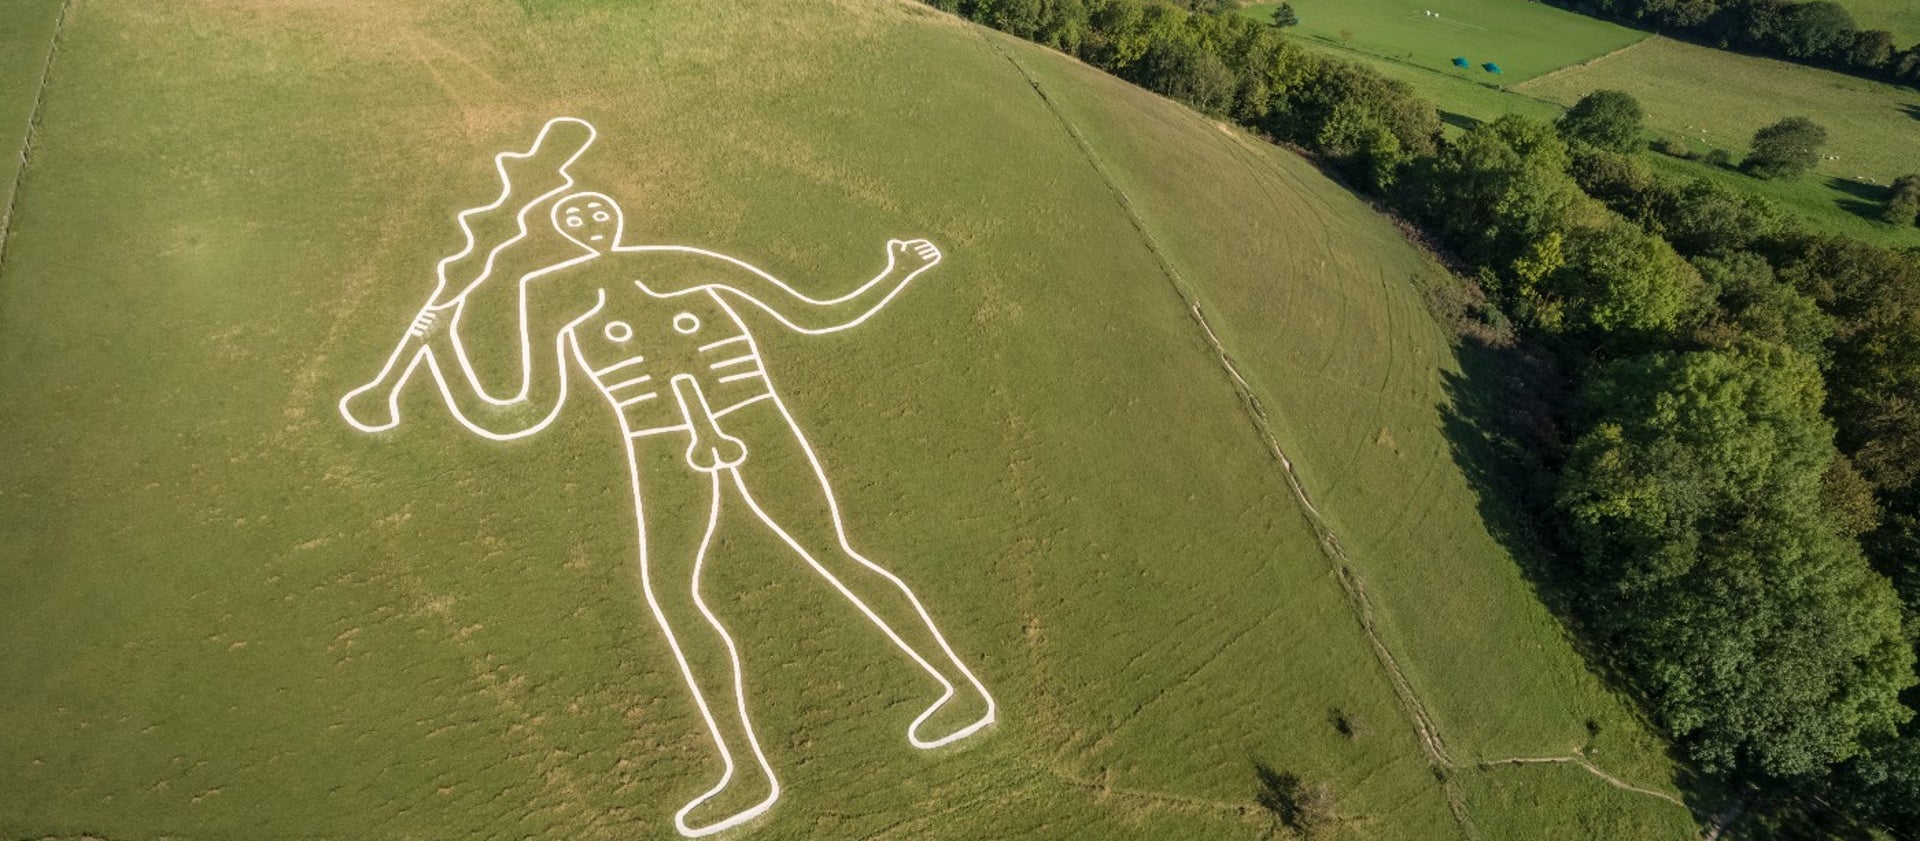 Cerne Giant - a 20 minute drive